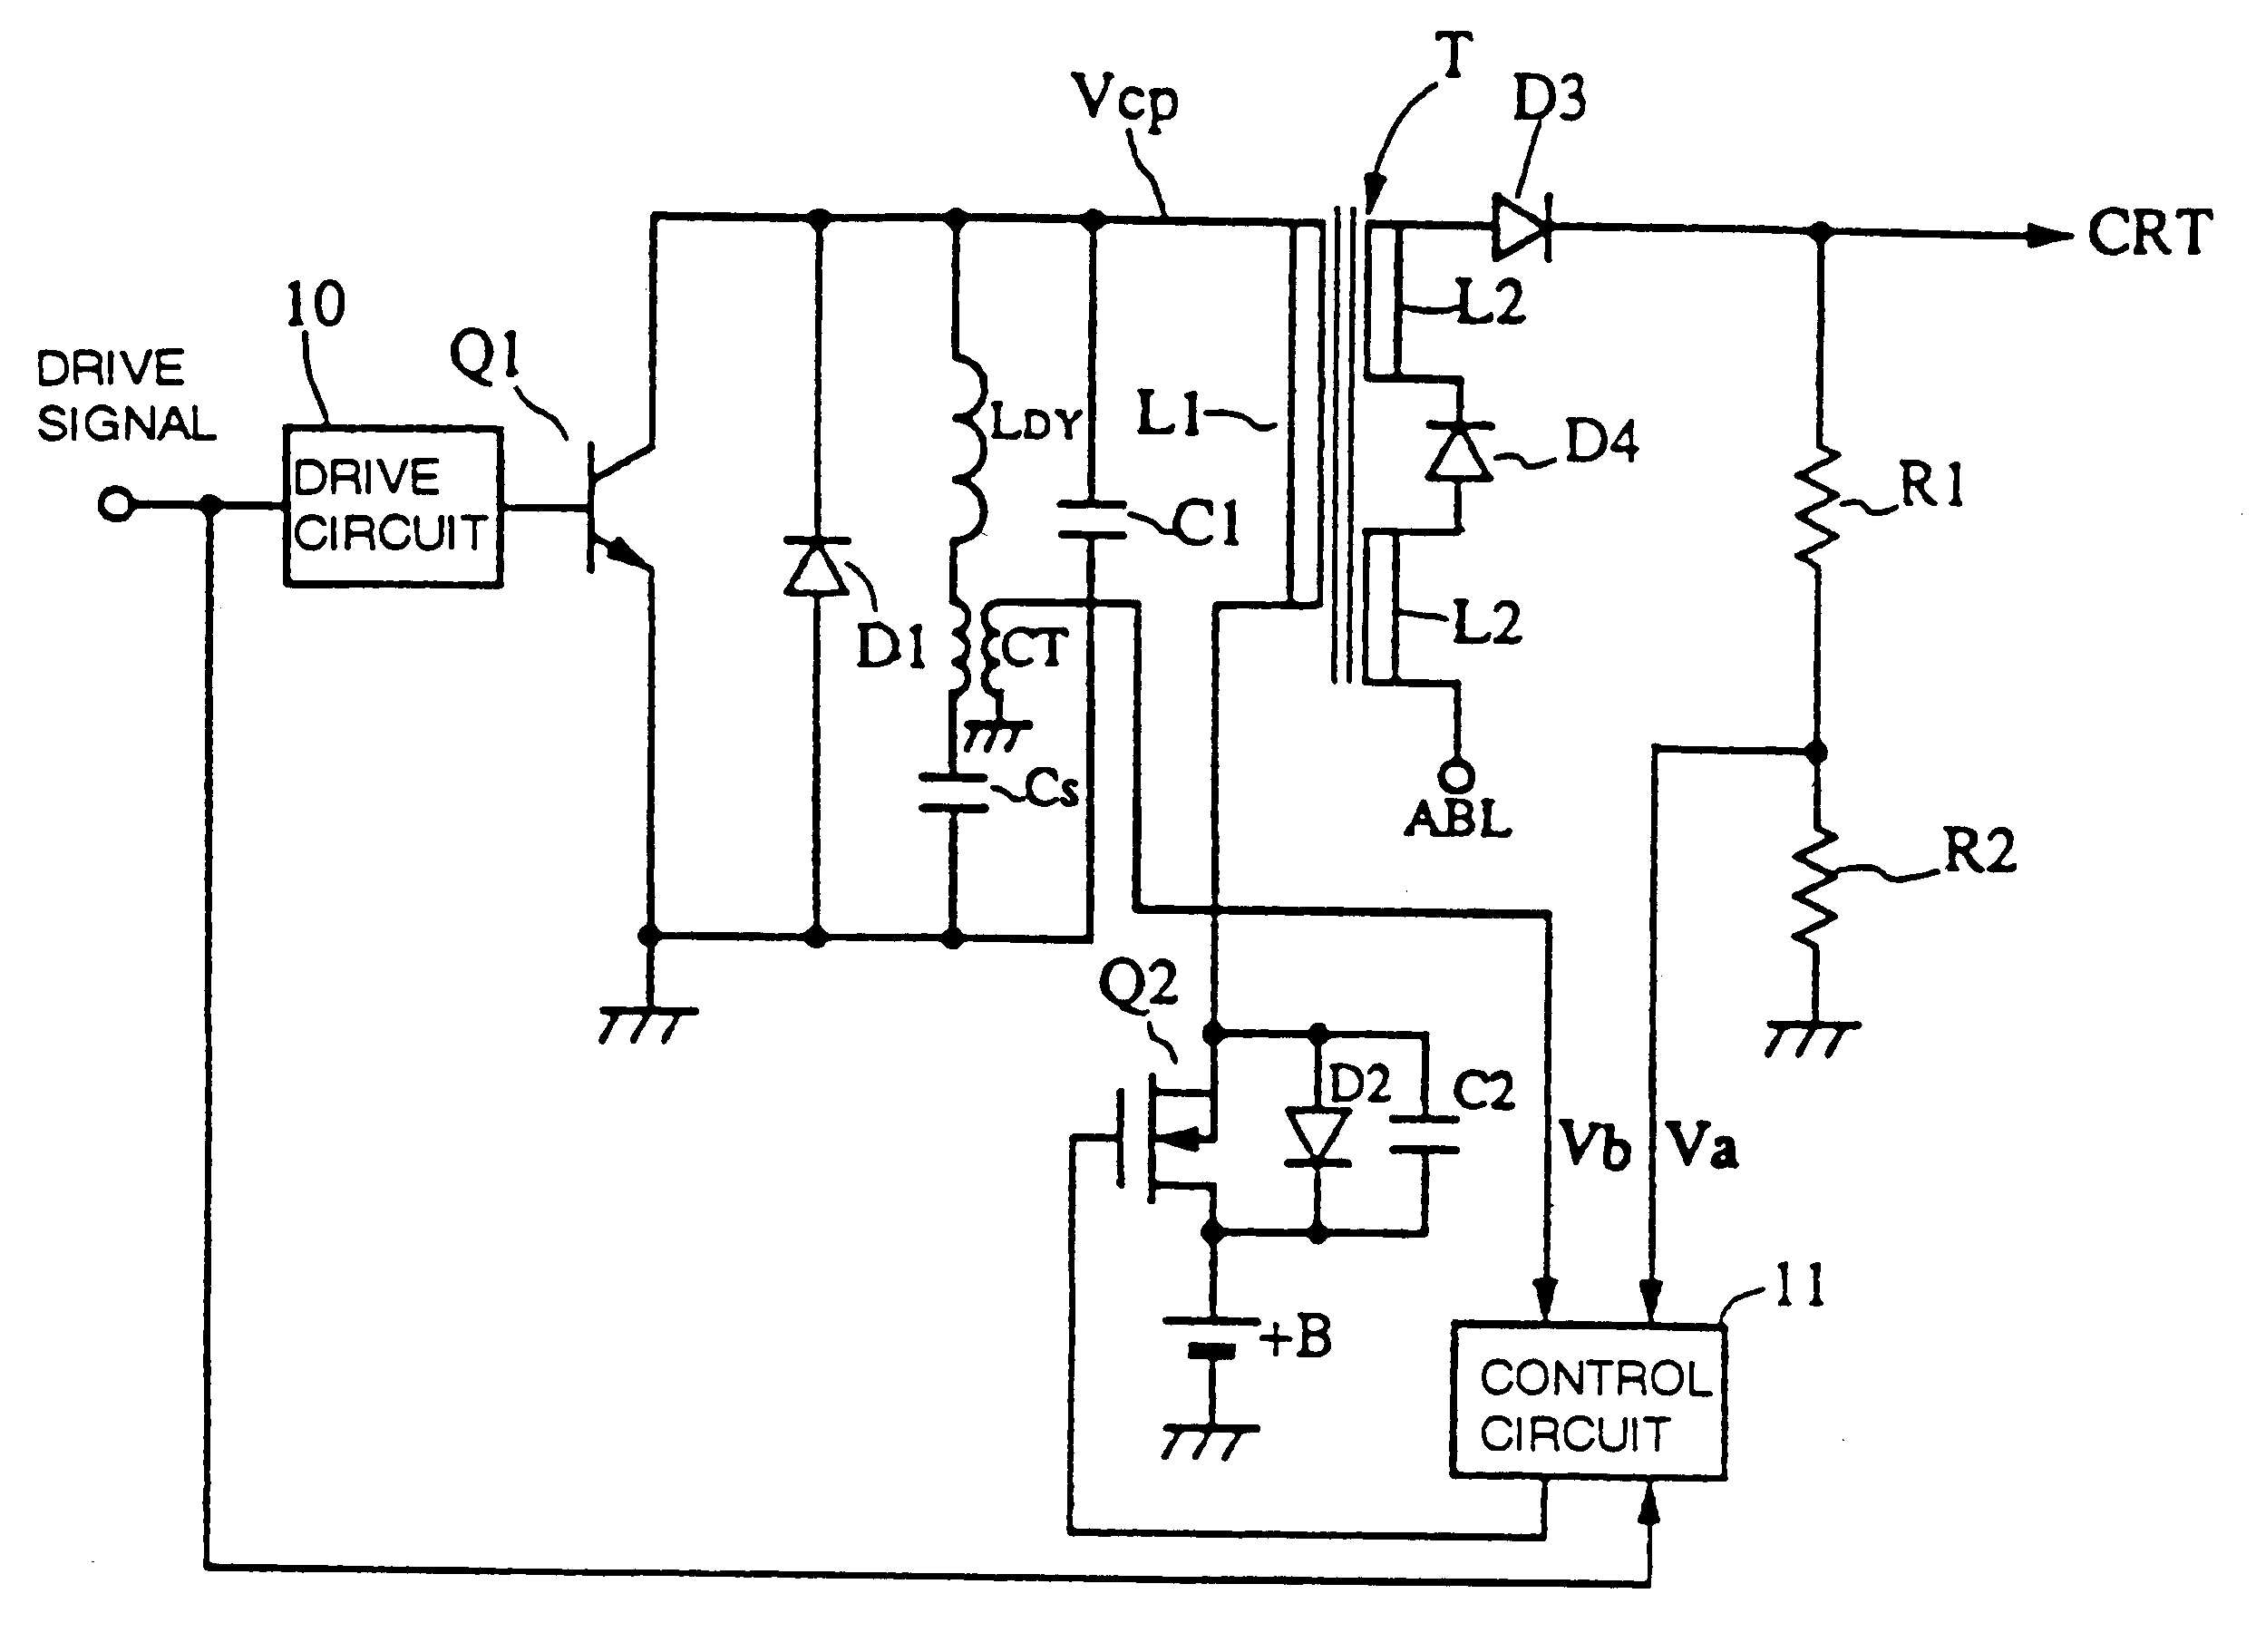 Deflection current/high voltage integration type power supply